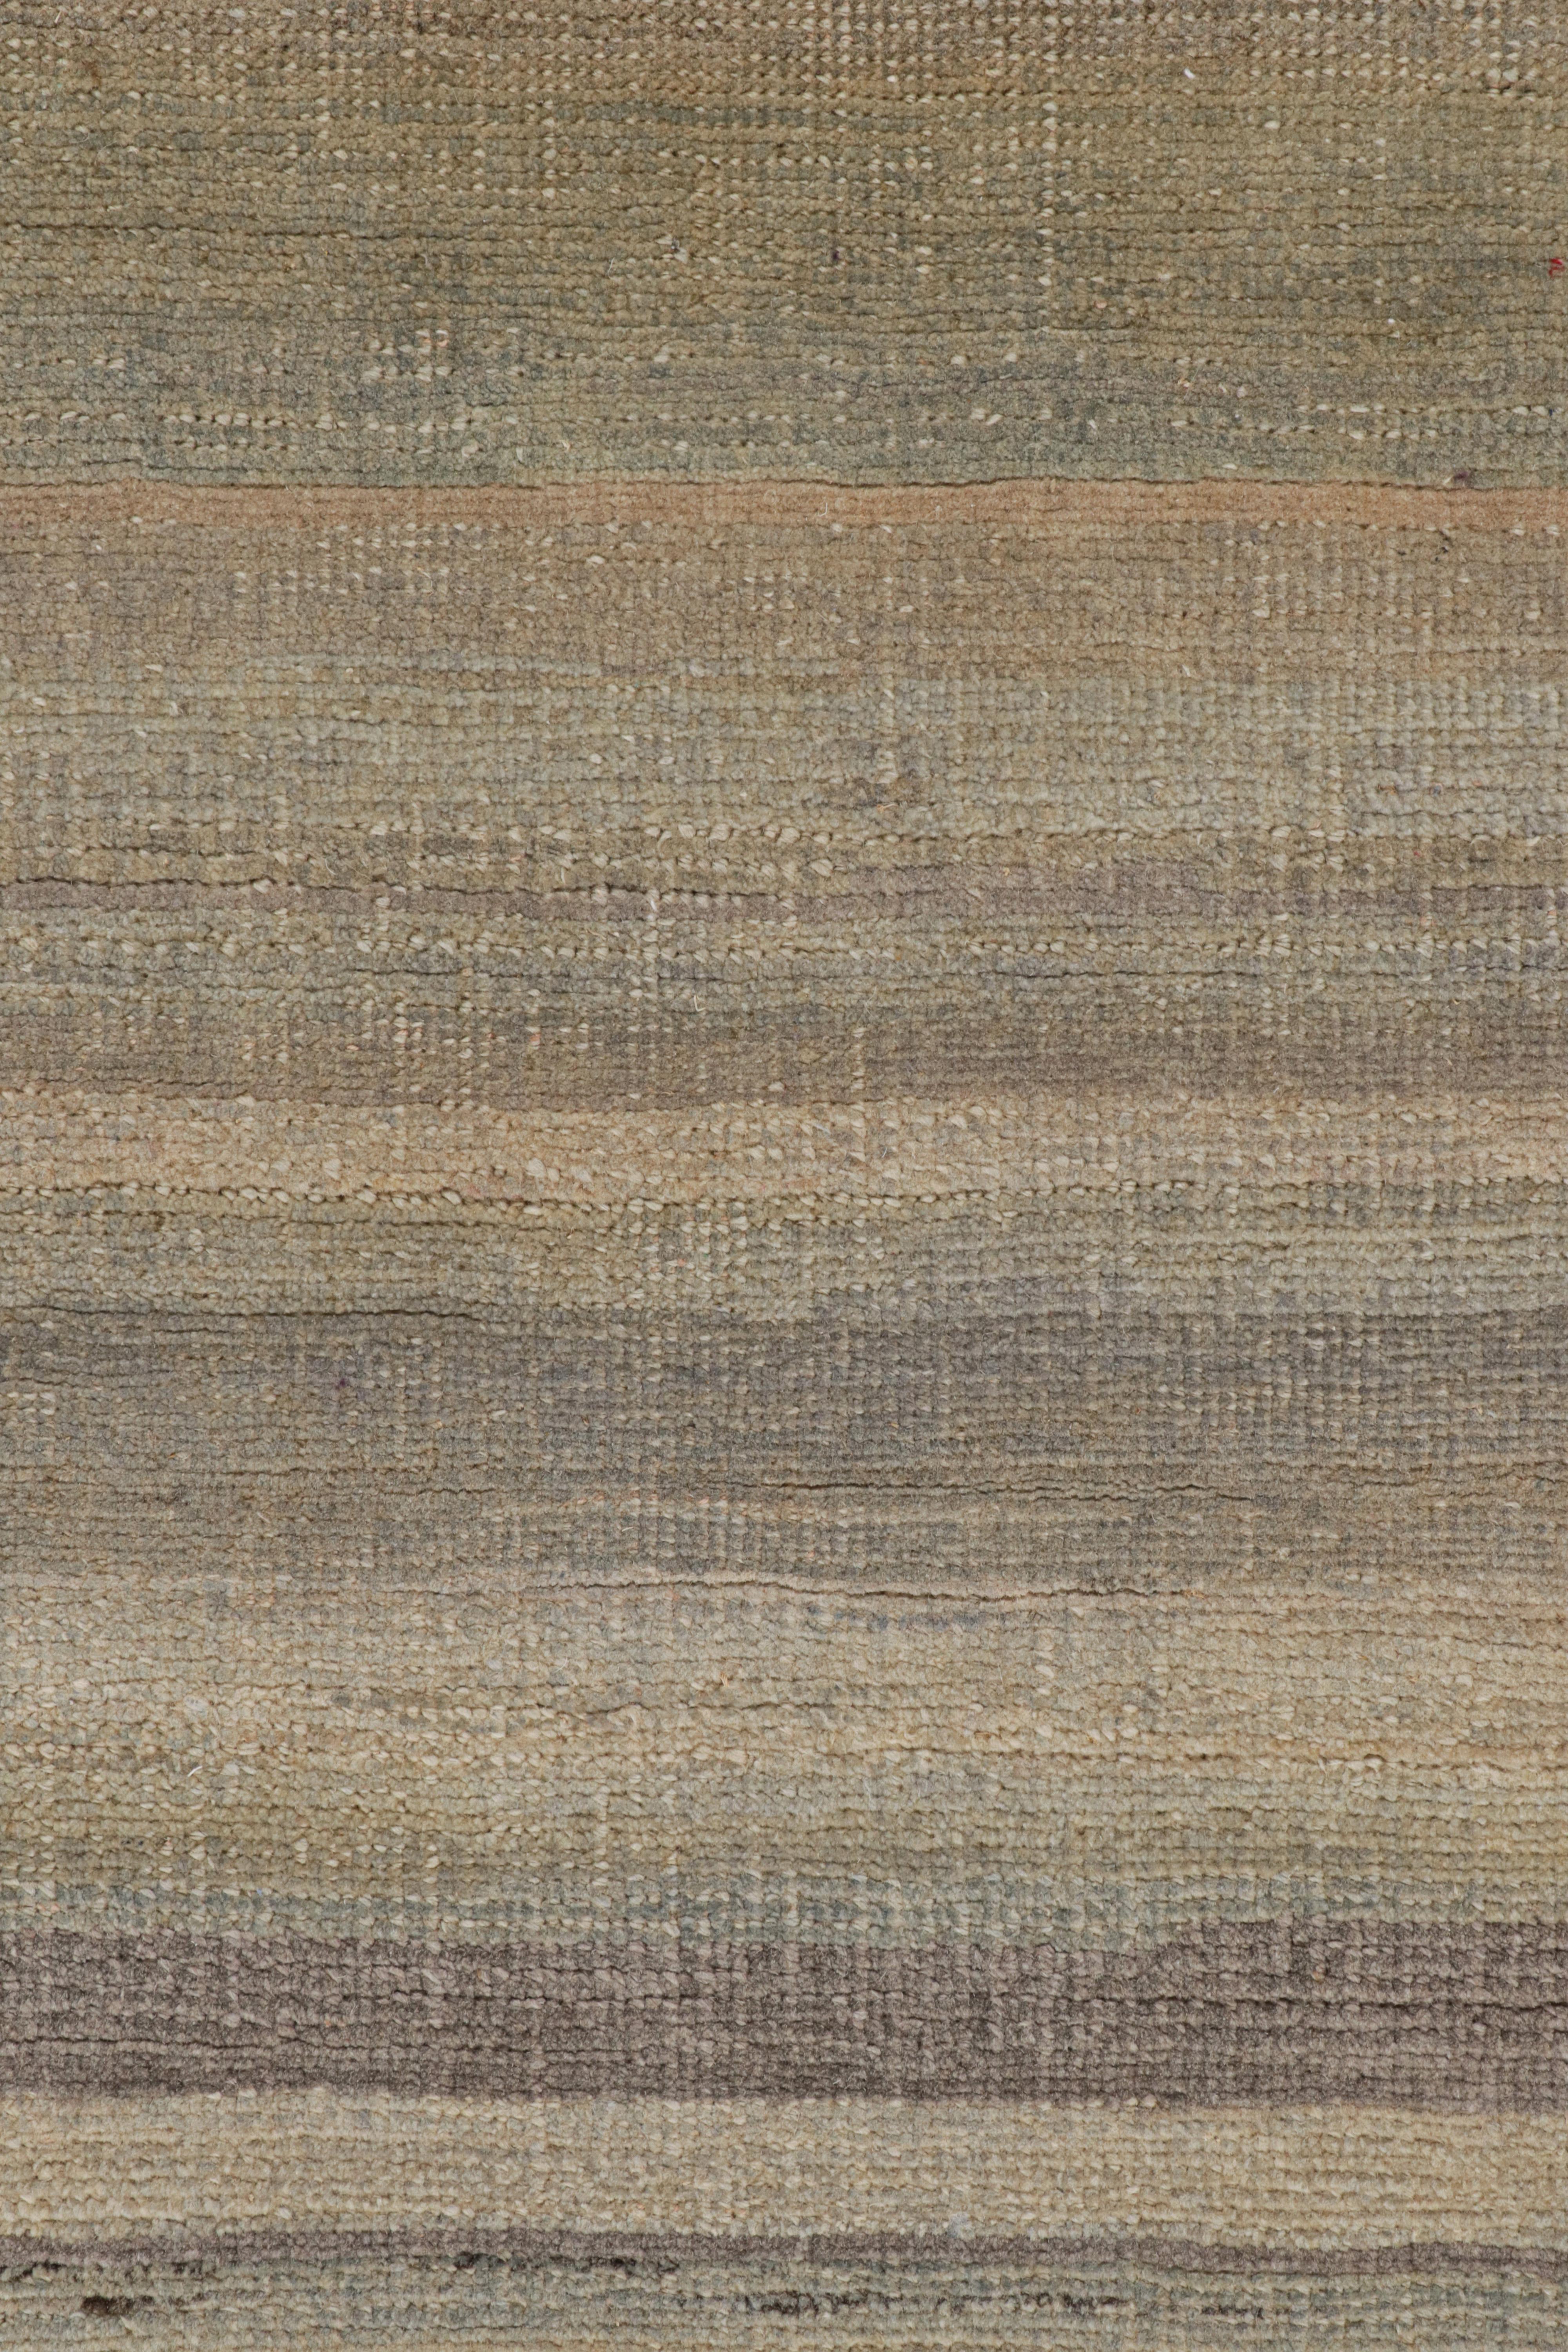 Indian Rug & Kilim’s Modern Textural Rug in Beige, Gray and Blue Stripes and Striae For Sale